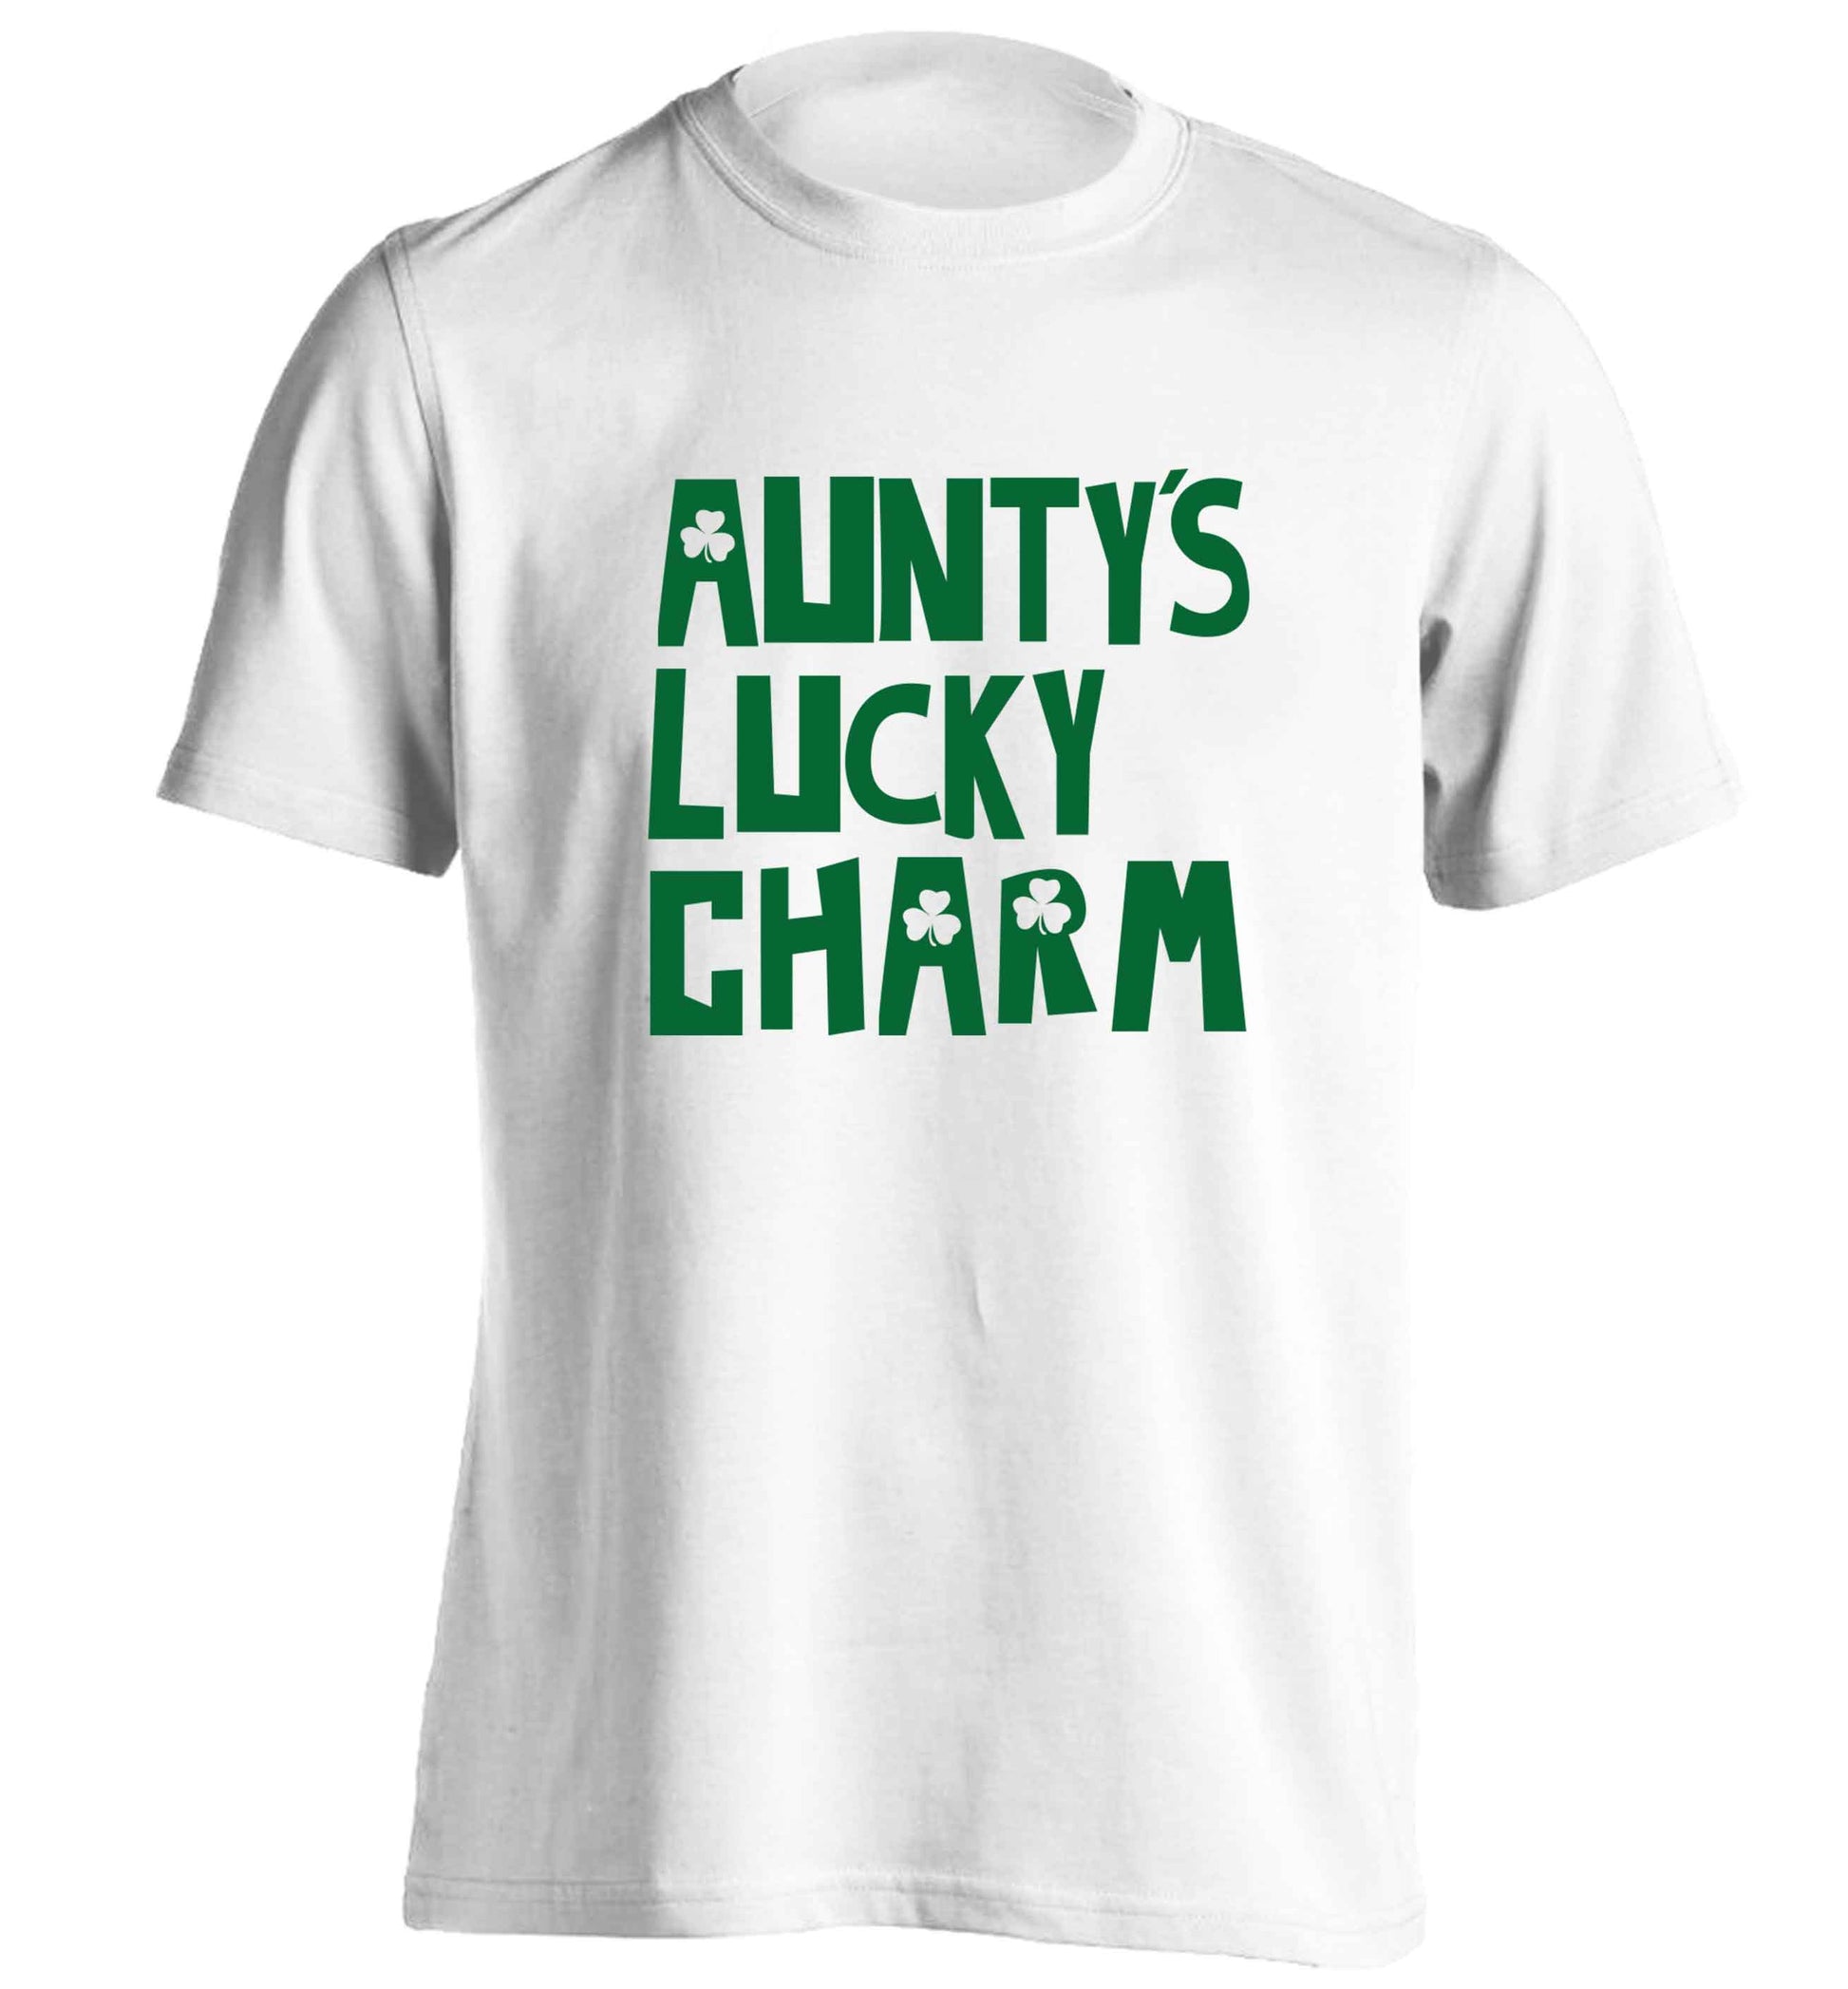 Aunty's lucky charm adults unisex white Tshirt 2XL